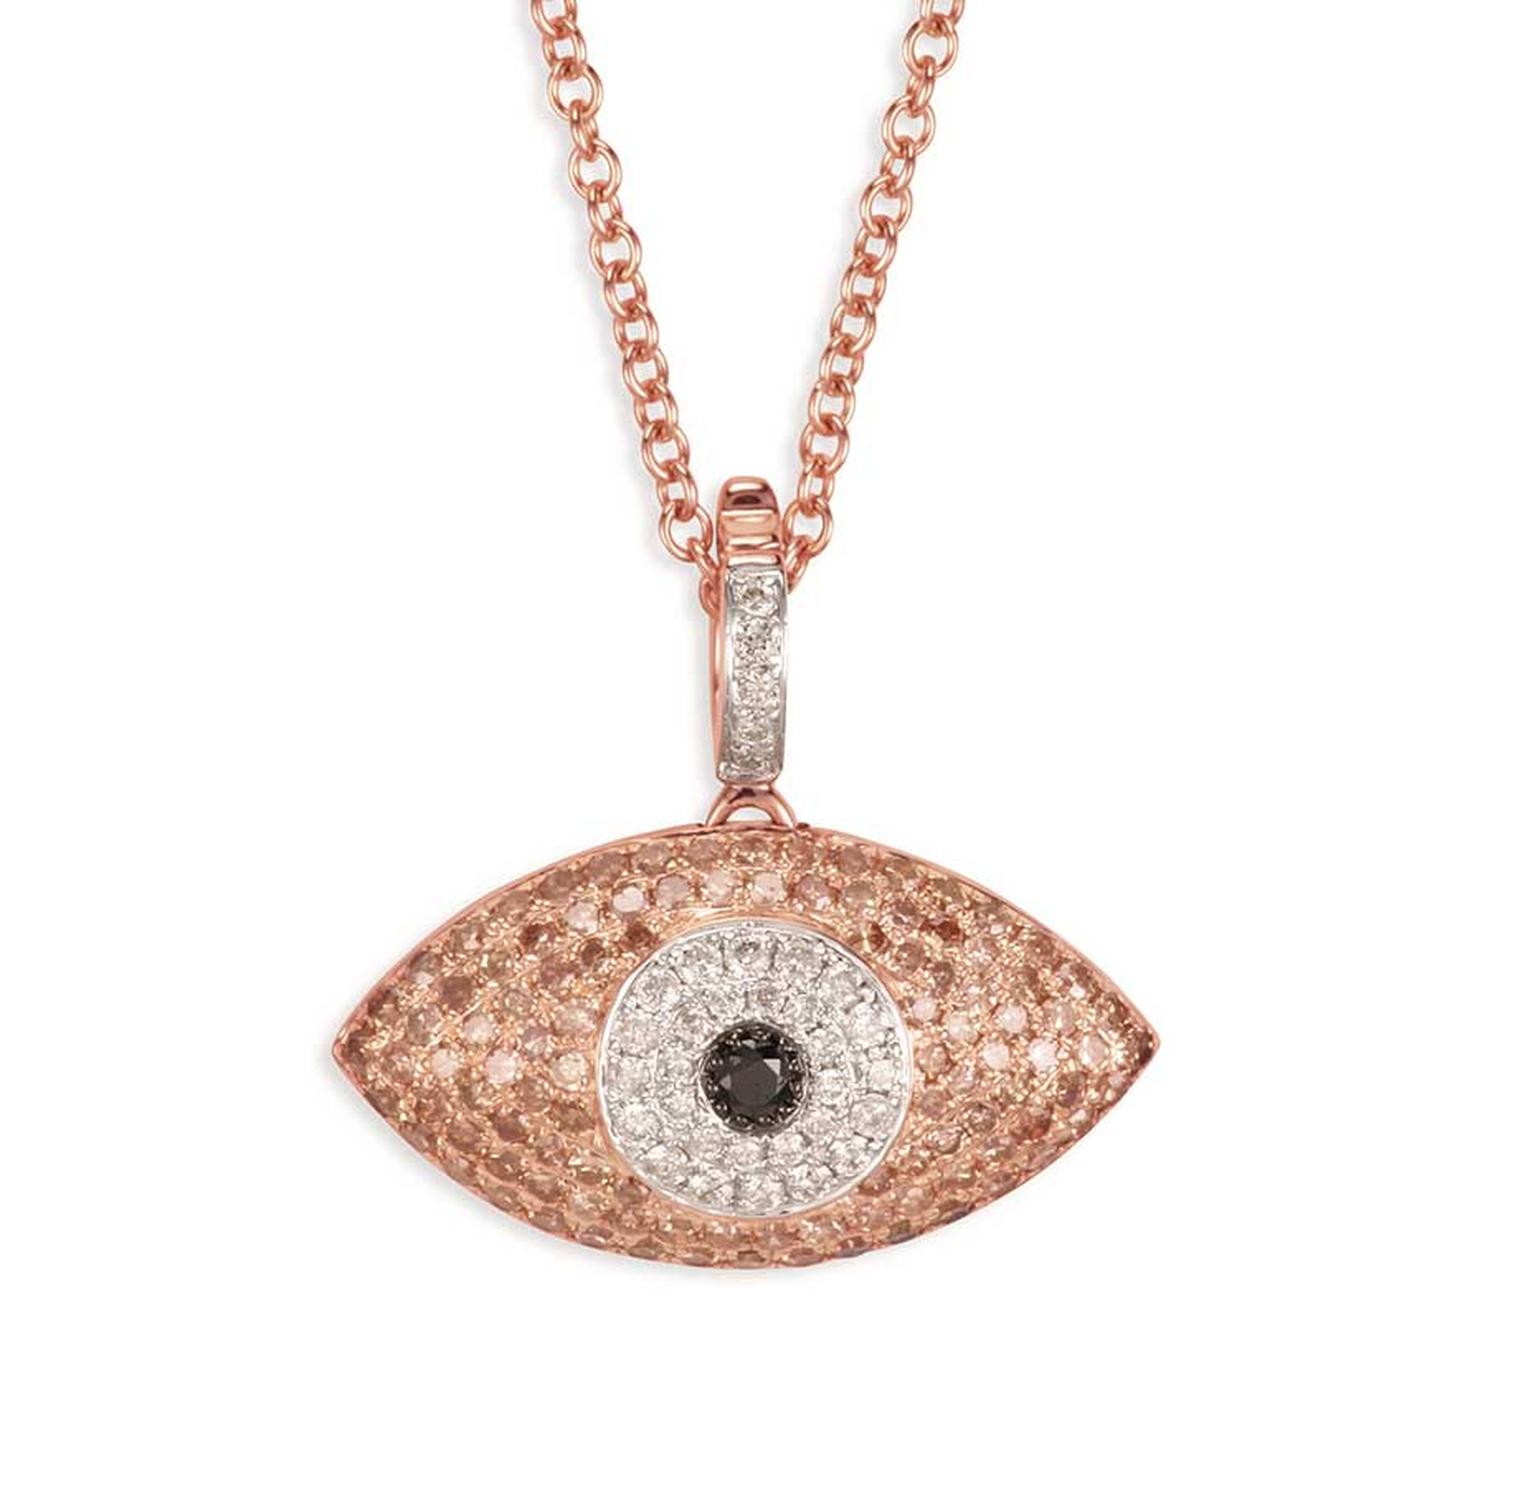 Sydney Evan Puffy Evil Eye necklace in rose gold with pavé champagne, black and white diamonds.